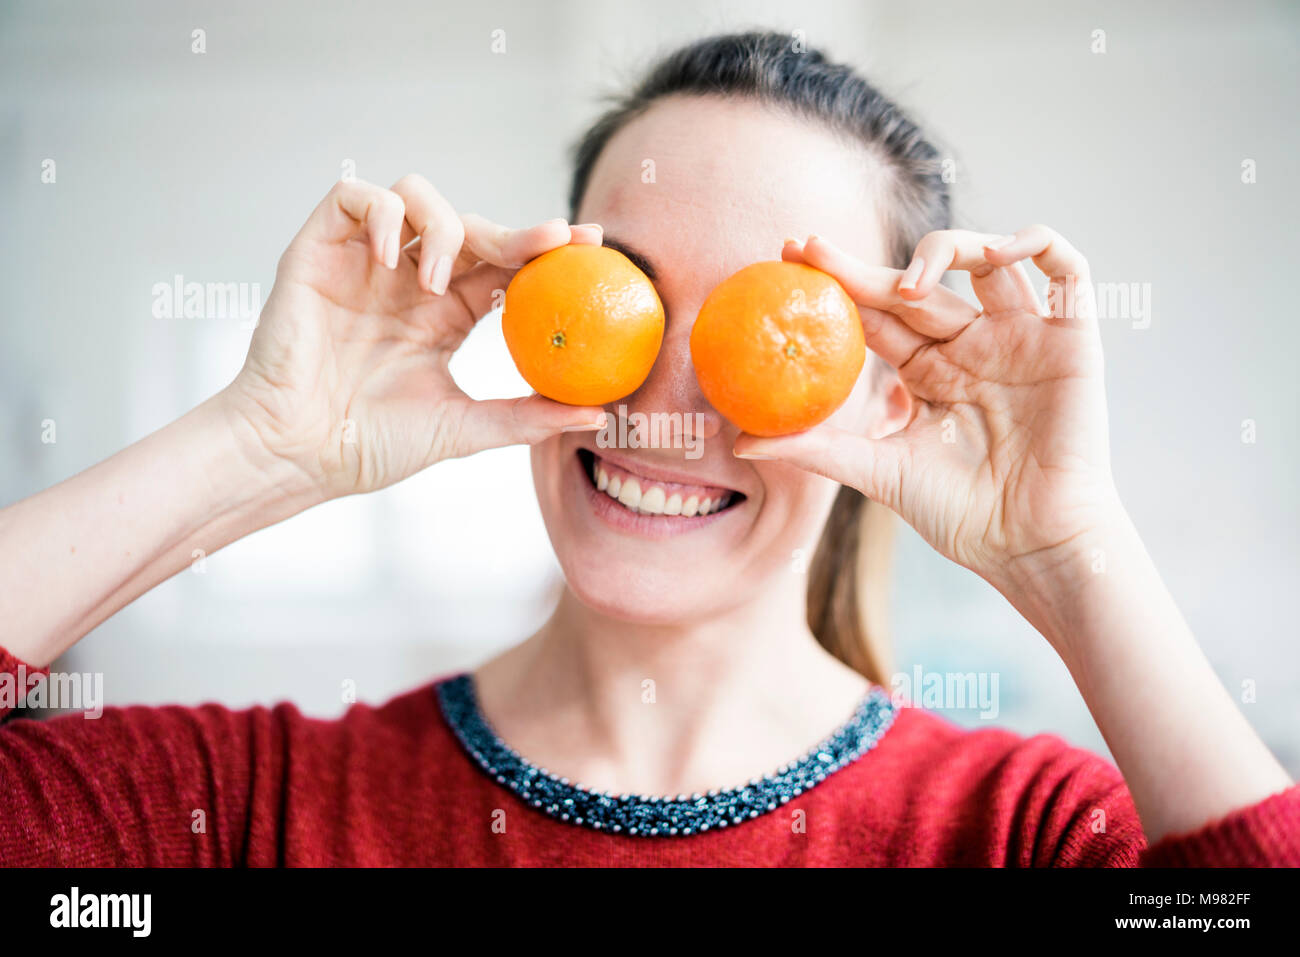 Laughing woman covering her eyes with oranges Stock Photo